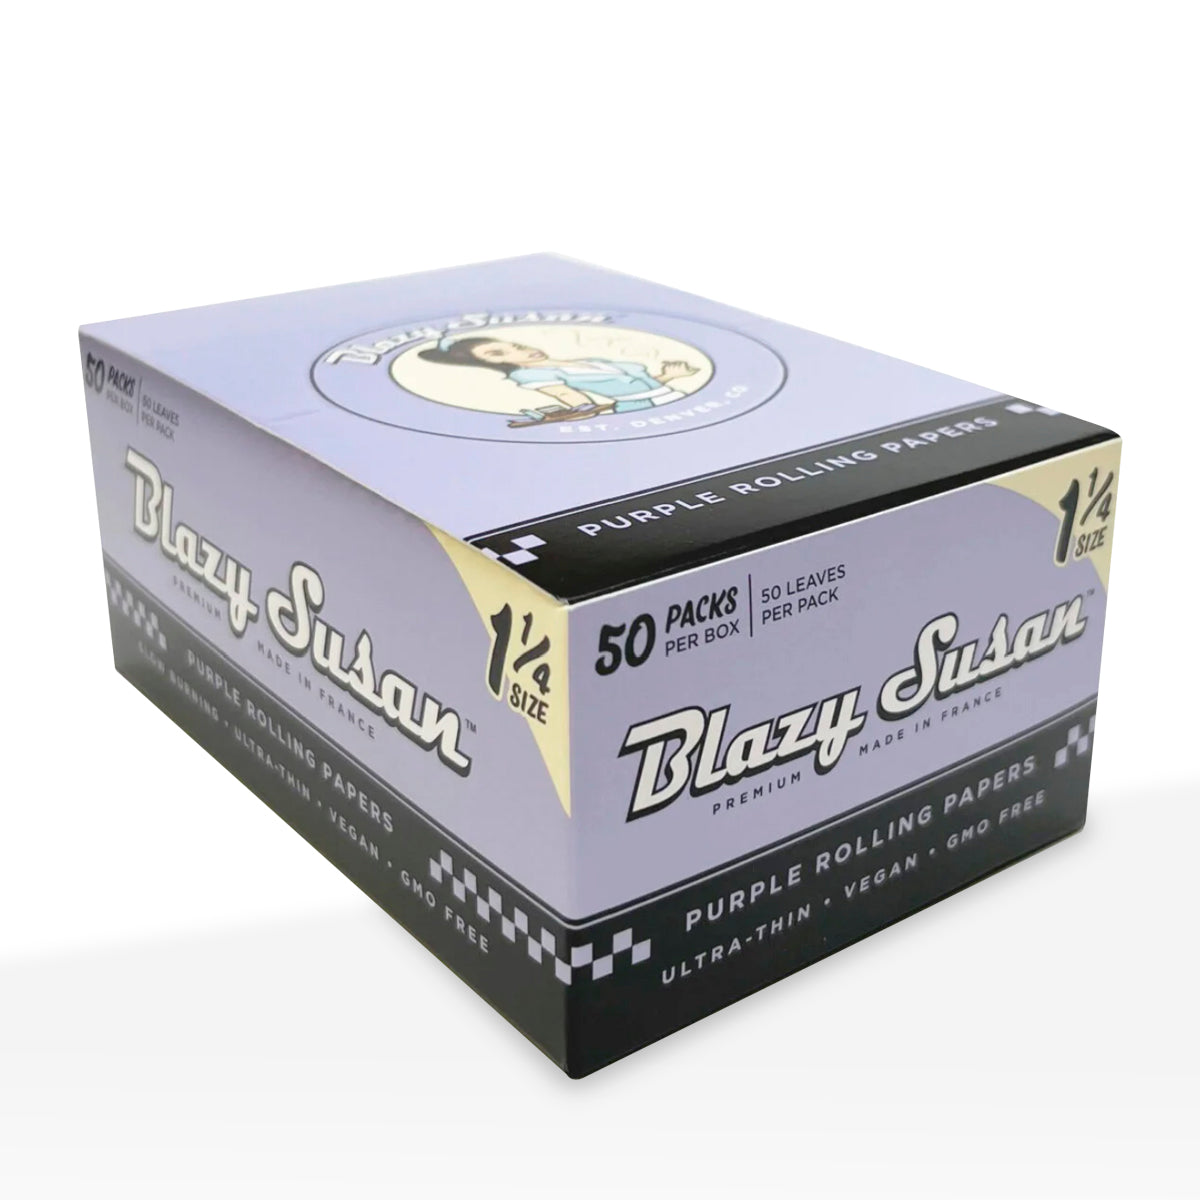 Blazy Susan Purple Rolling Papers 84mm - 50 Booklets